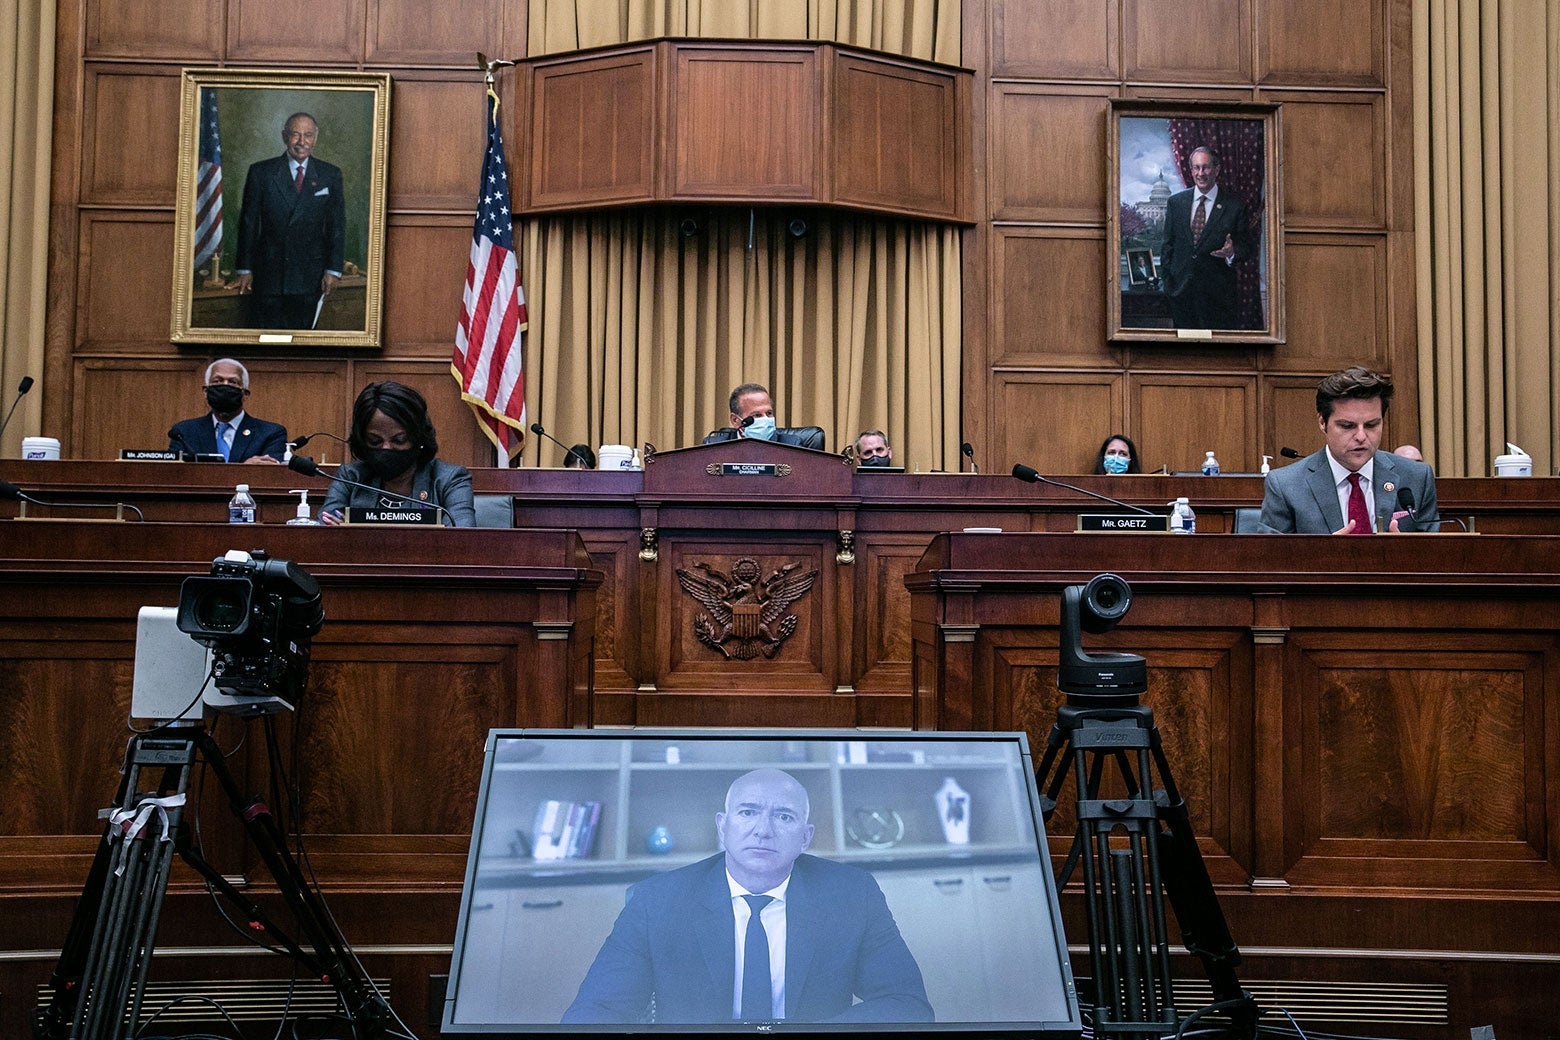 Bezos on a videoconference screen in front of a panel of seated House members in the hearing room